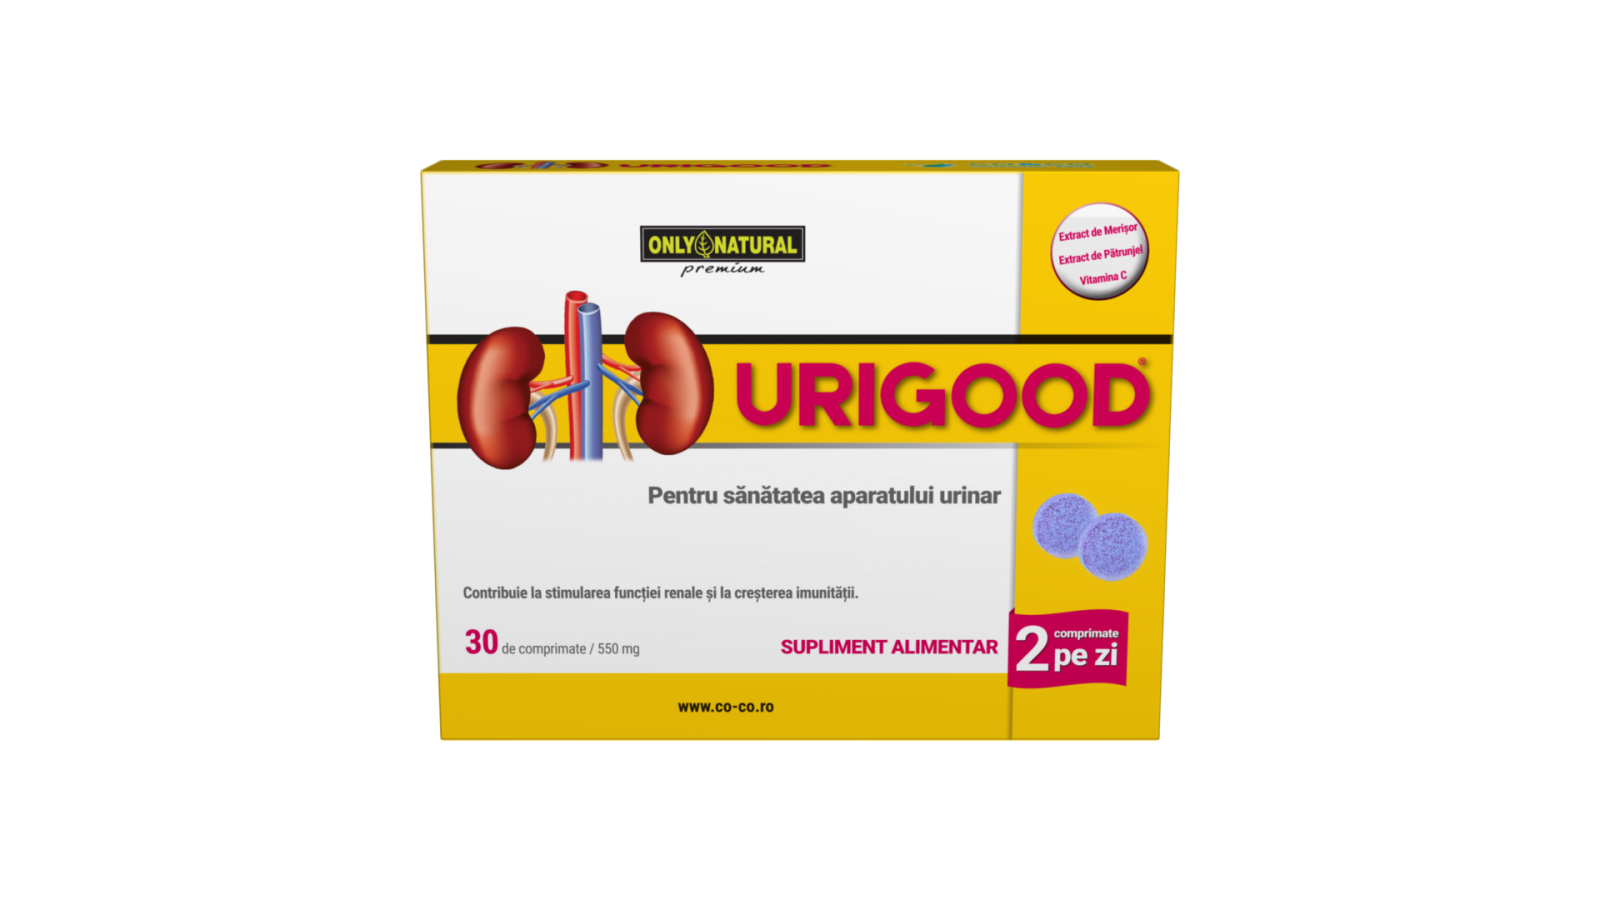 Urigood mg, 30 comprimate, Only Natural : Farmacia Tei online